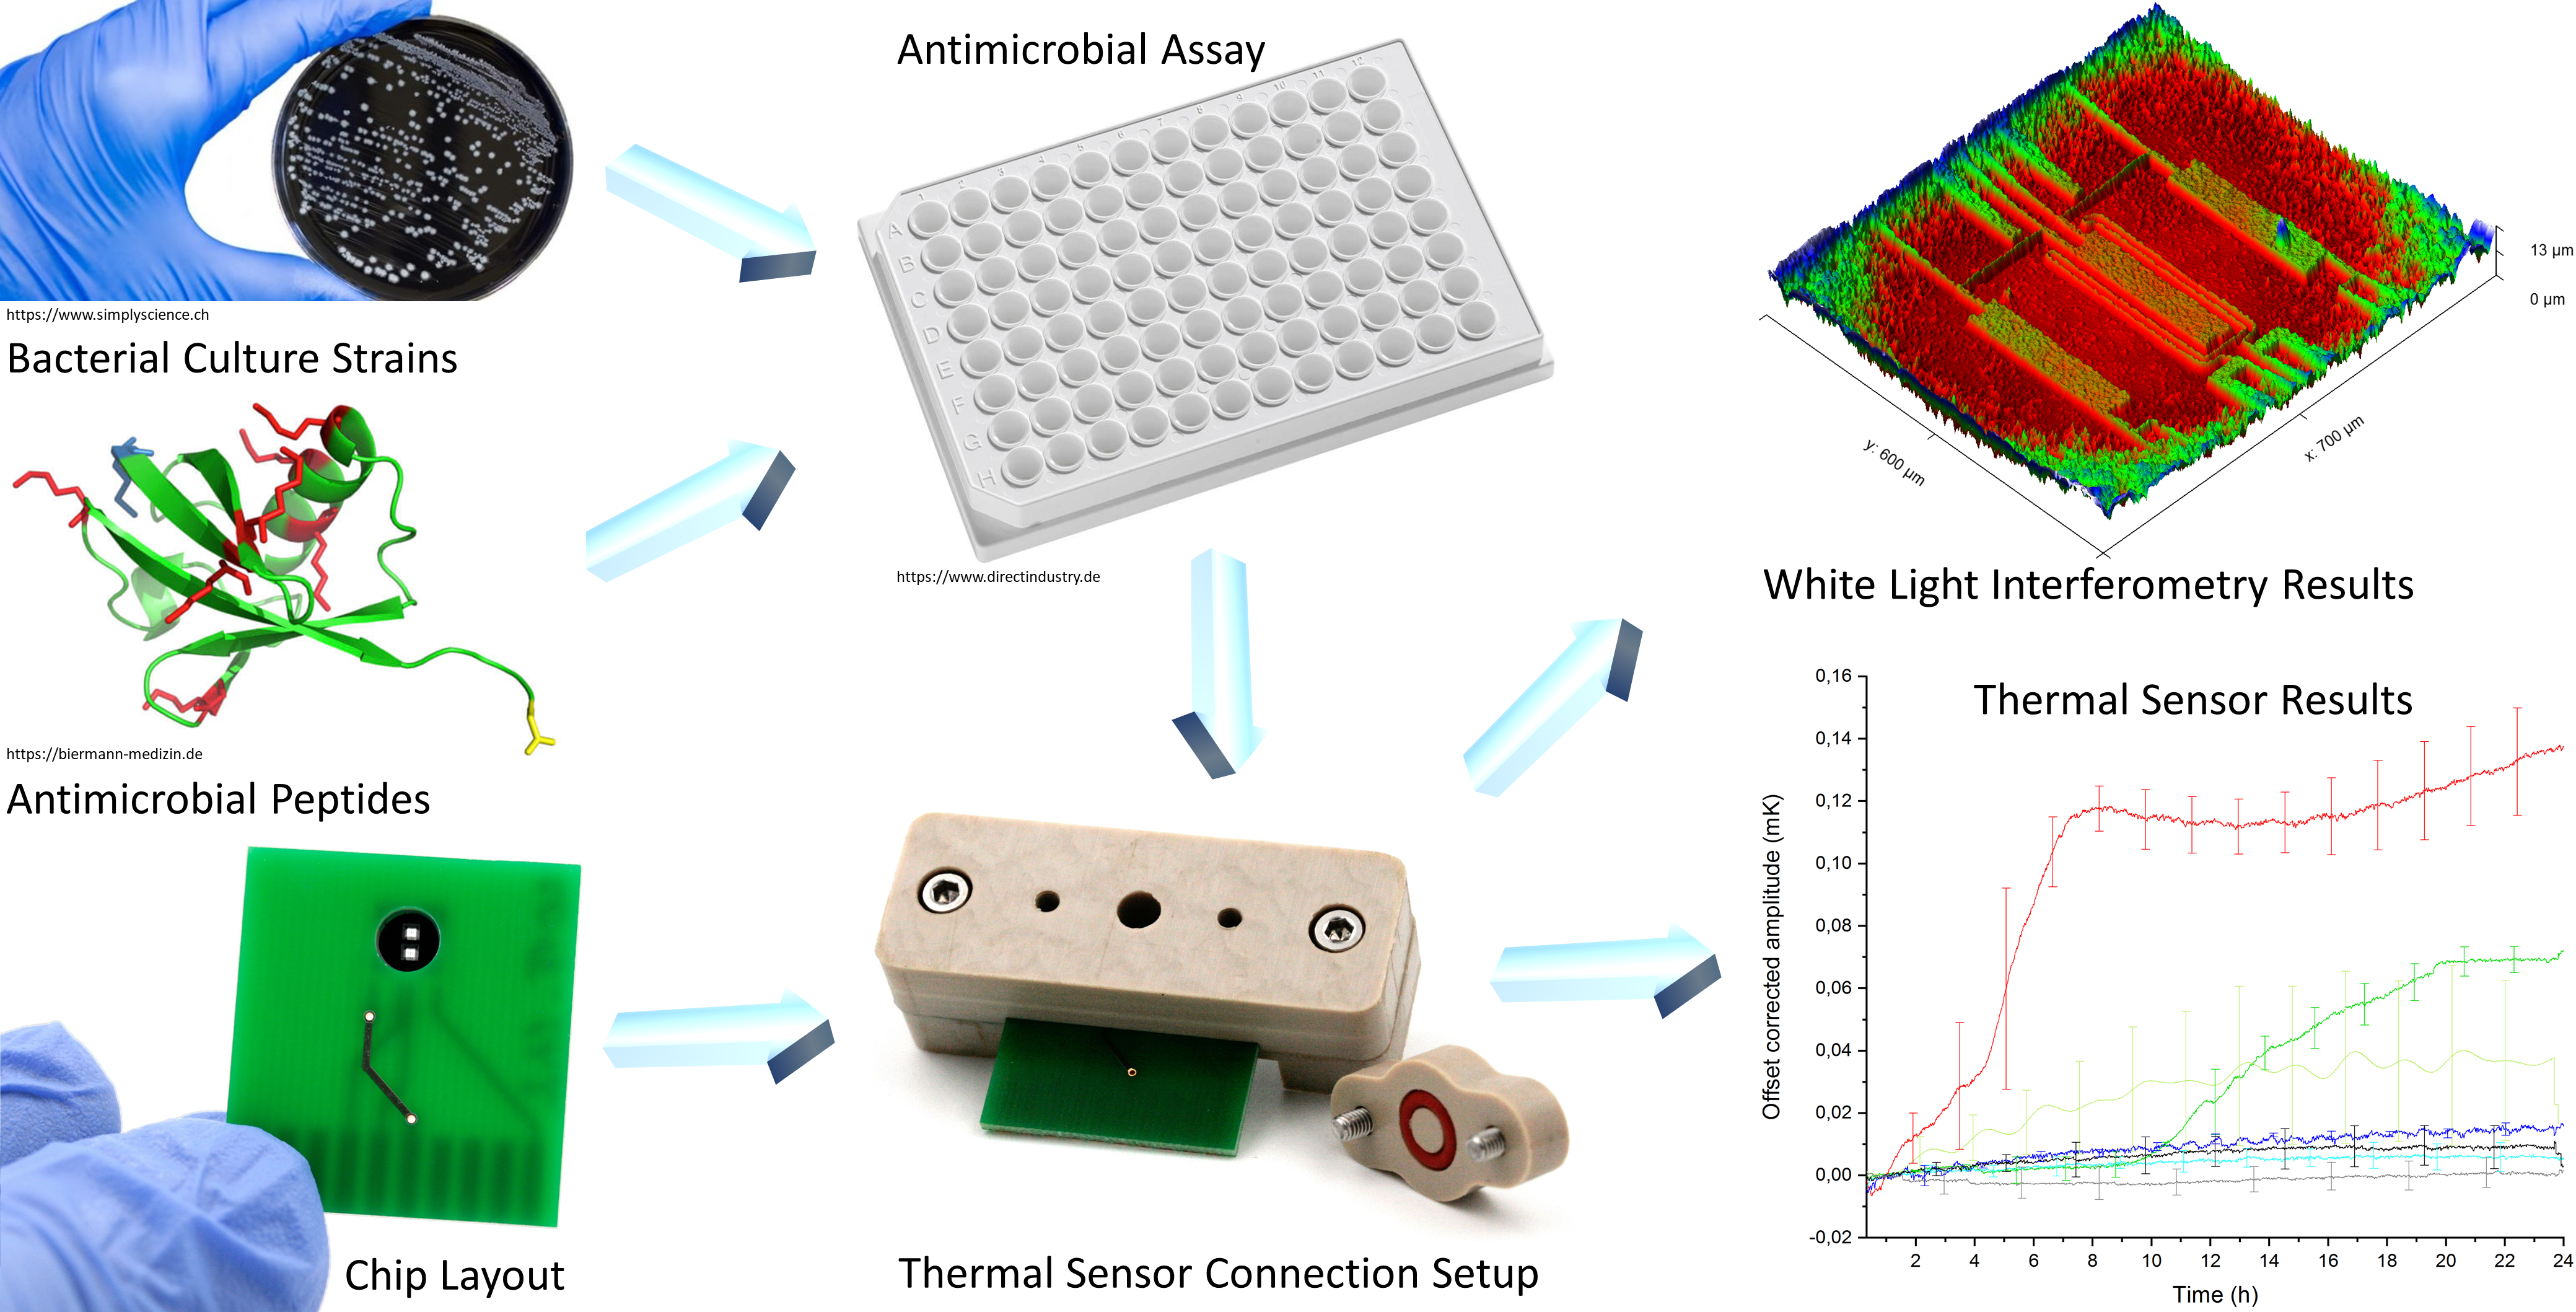 Sensors | Free Full-Text | A Real-Time Thermal Sensor System for  Quantifying the Inhibitory Effect of Antimicrobial Peptides on Bacterial  Adhesion and Biofilm Formation | HTML